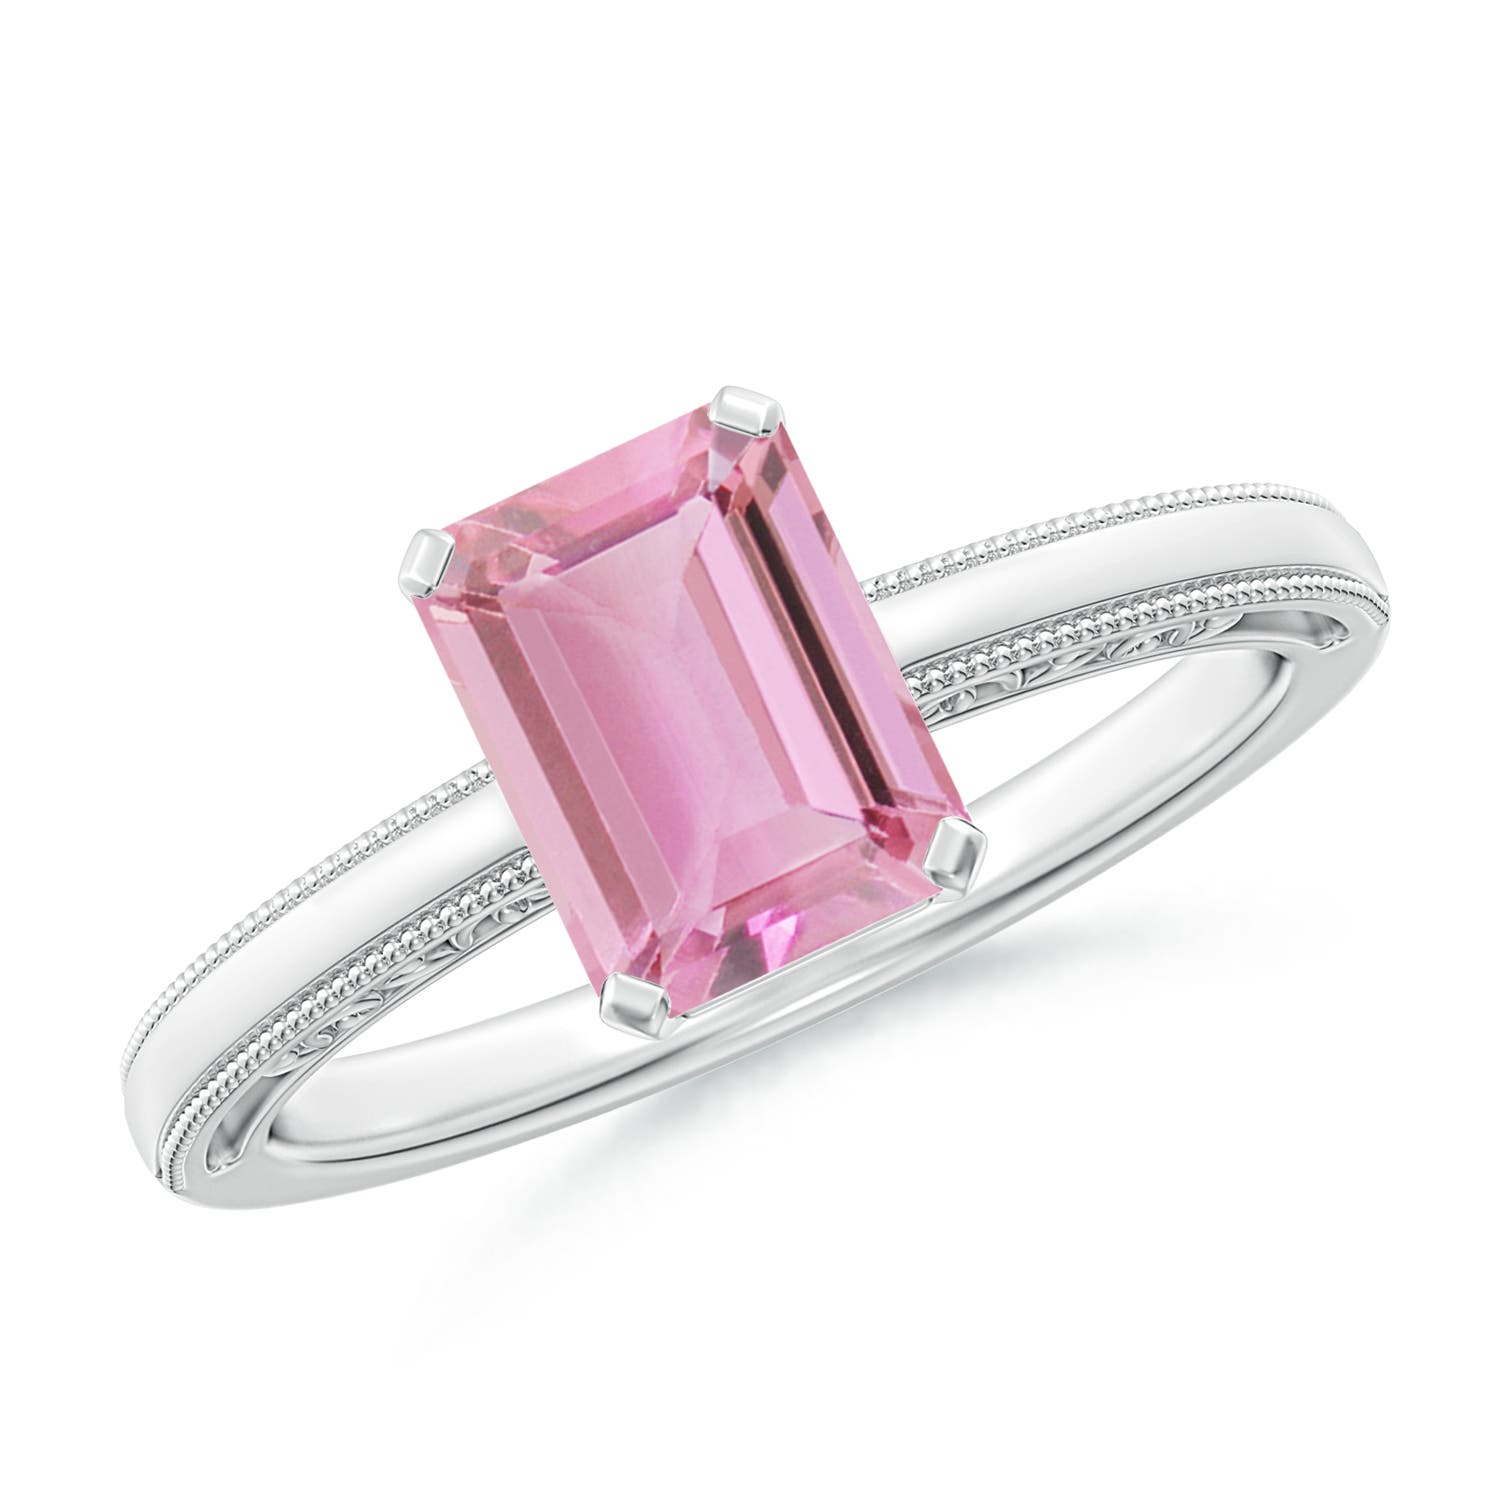 Emerald Cut Pink Tourmaline Solitaire Ring with Milgrain